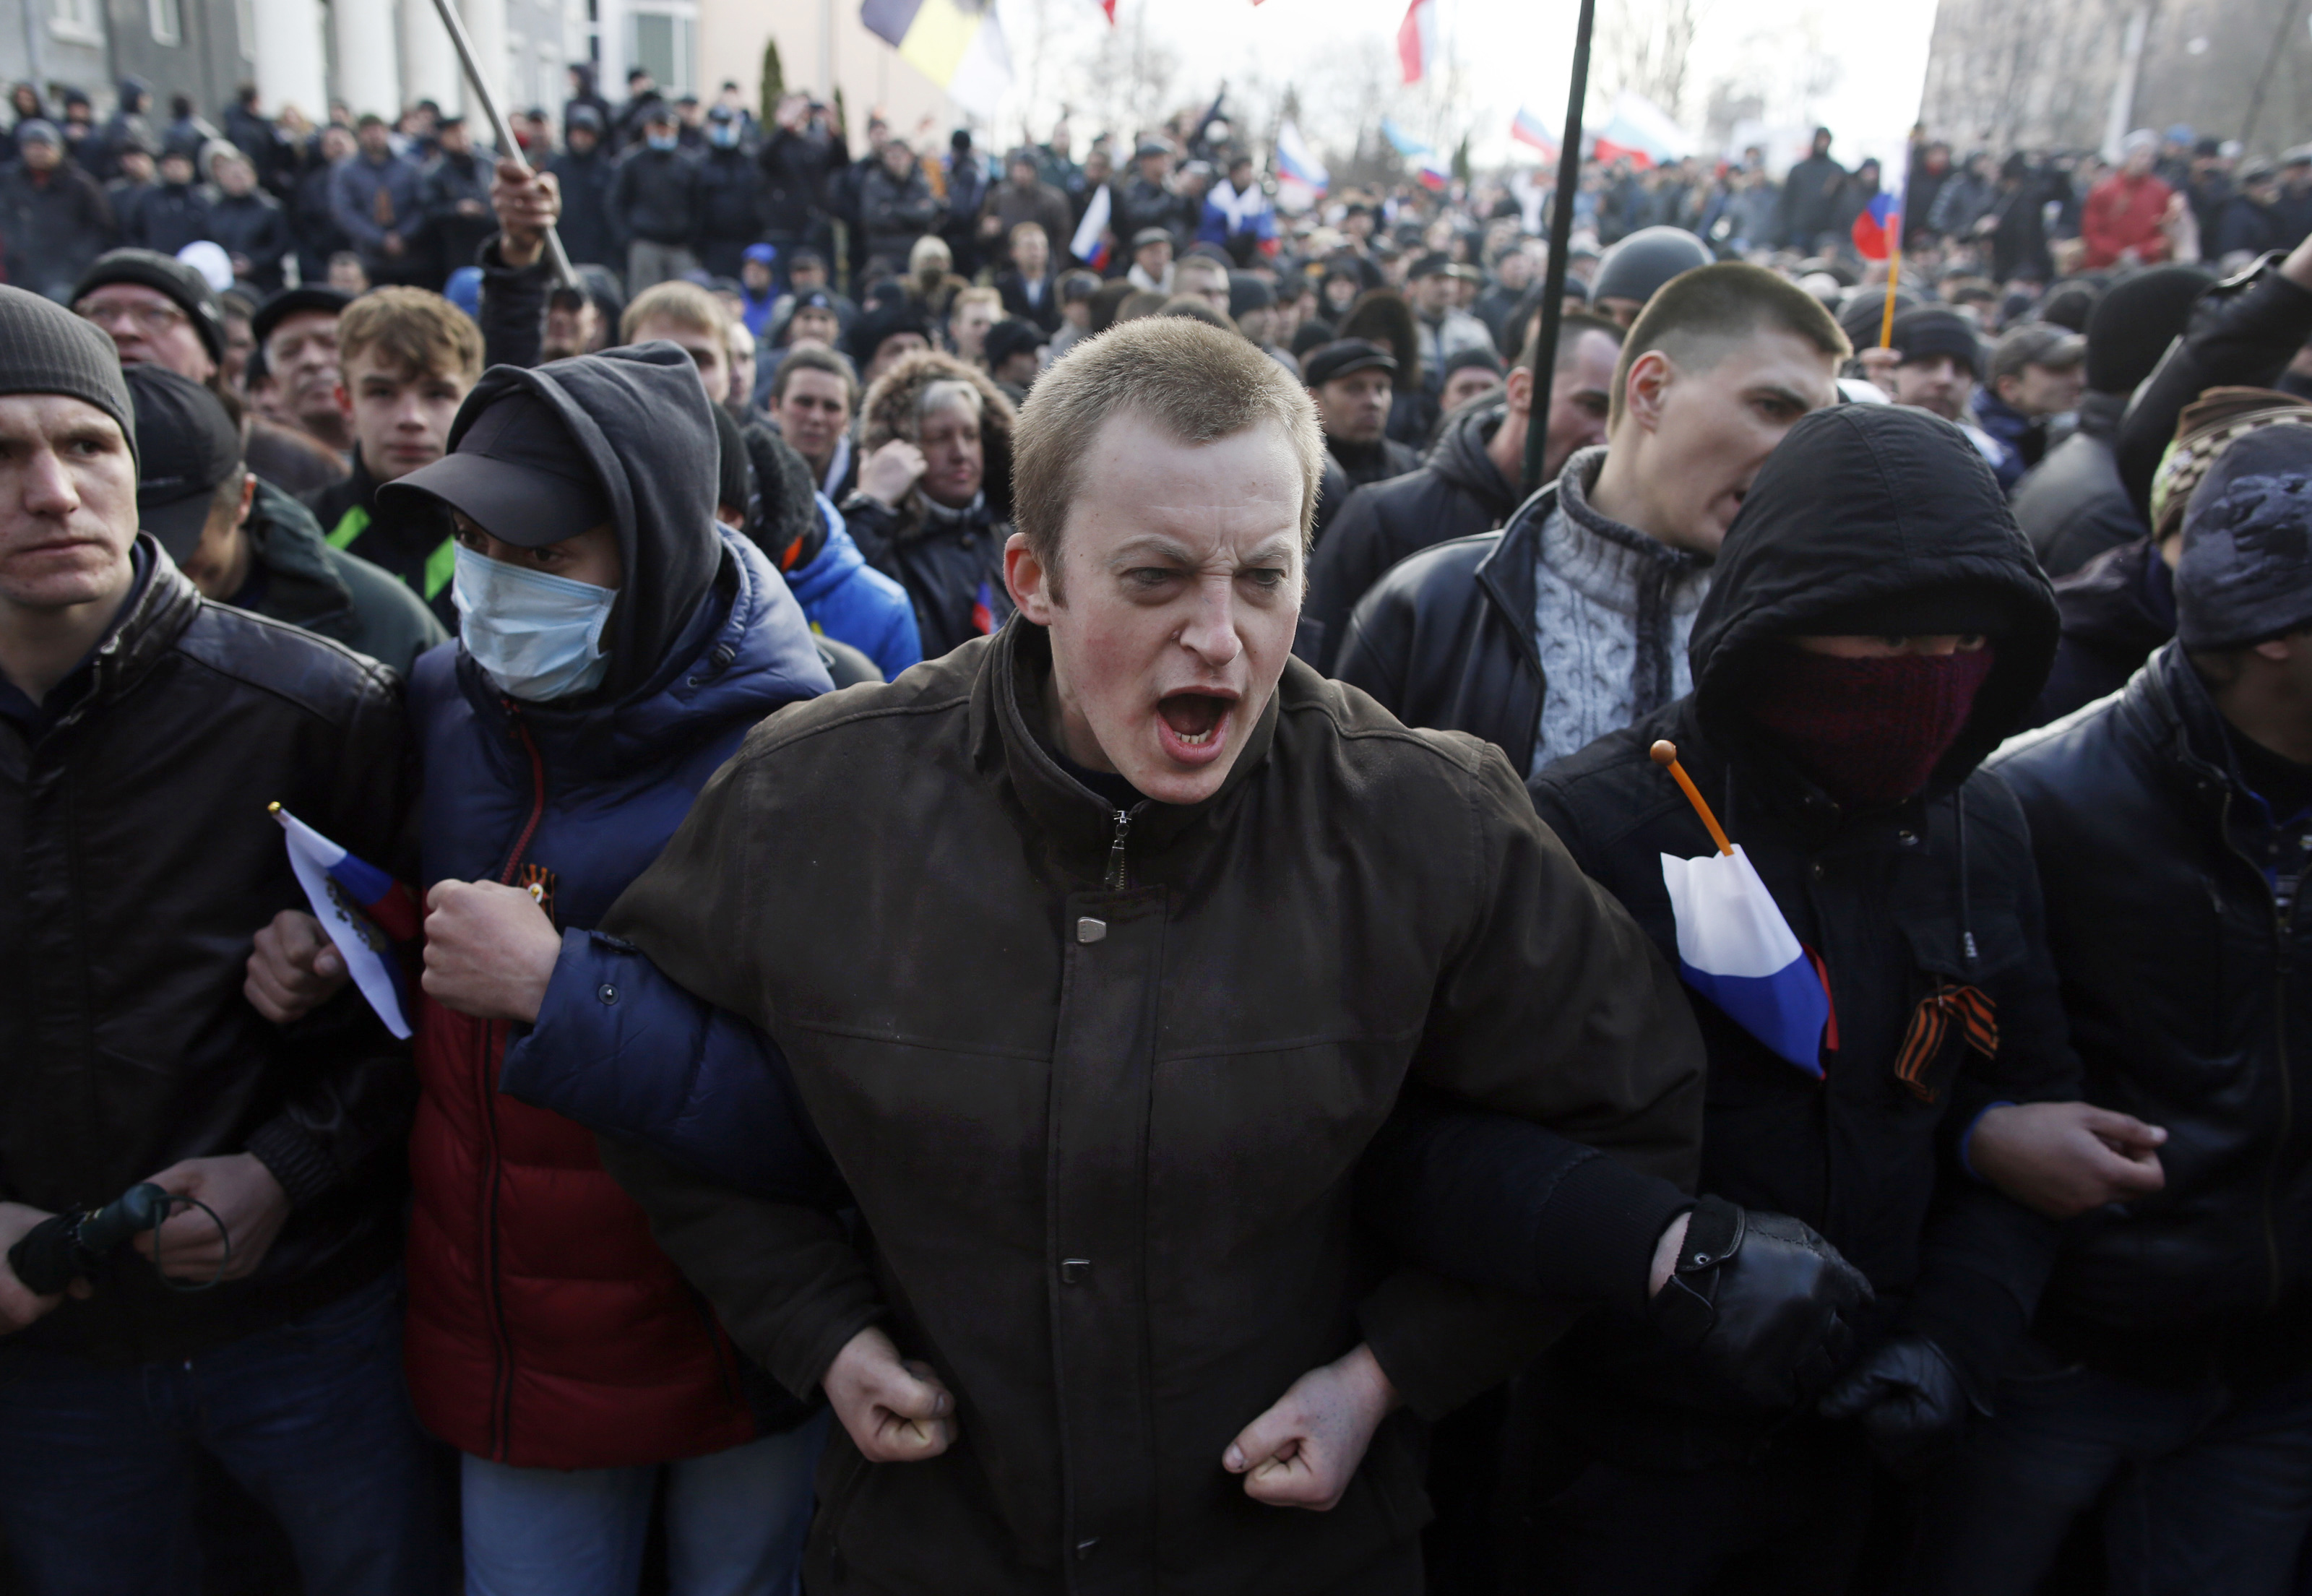 DONETSK, UKRAINE - MARCH 16: Pro-Russian protesters chant outside of the Donetsk Prosecutors Building before storming into the building during a protest in Donetsk, Ukraine on March 15, 2014. (Photo by Jessica Rinaldi for The Boston Globe via Getty Images)